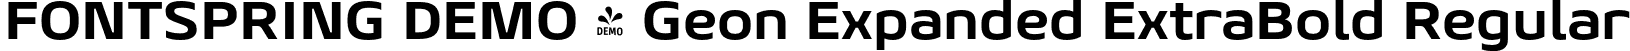 FONTSPRING DEMO - Geon Expanded ExtraBold Regular font - Fontspring-DEMO-geonexpanded-extrabold.otf